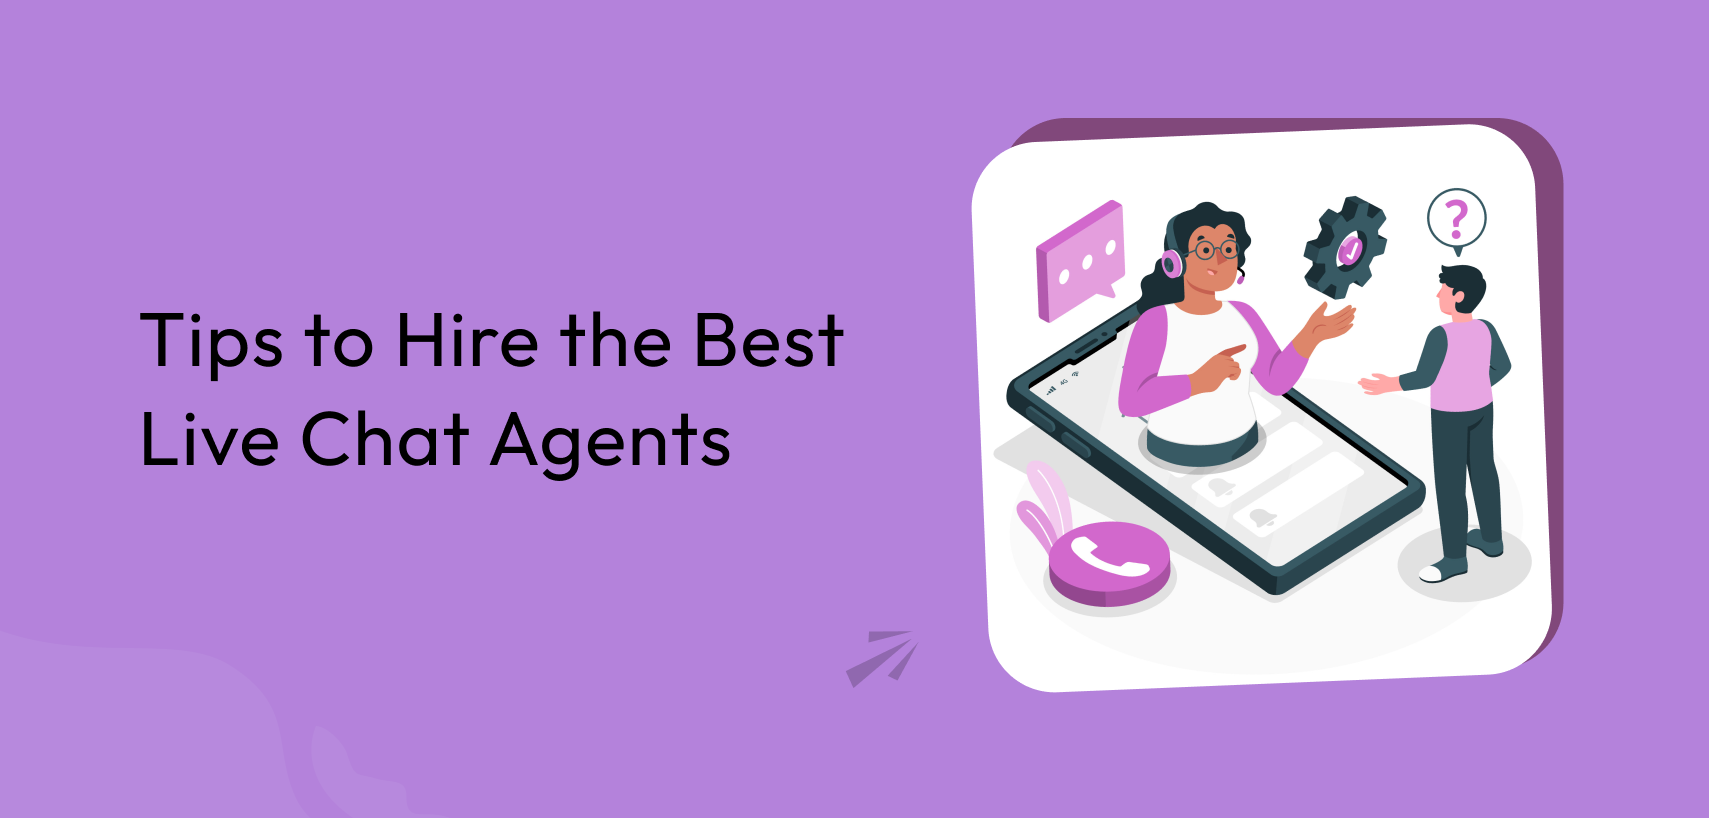 Tips to Hire the Best Live Chat Agents